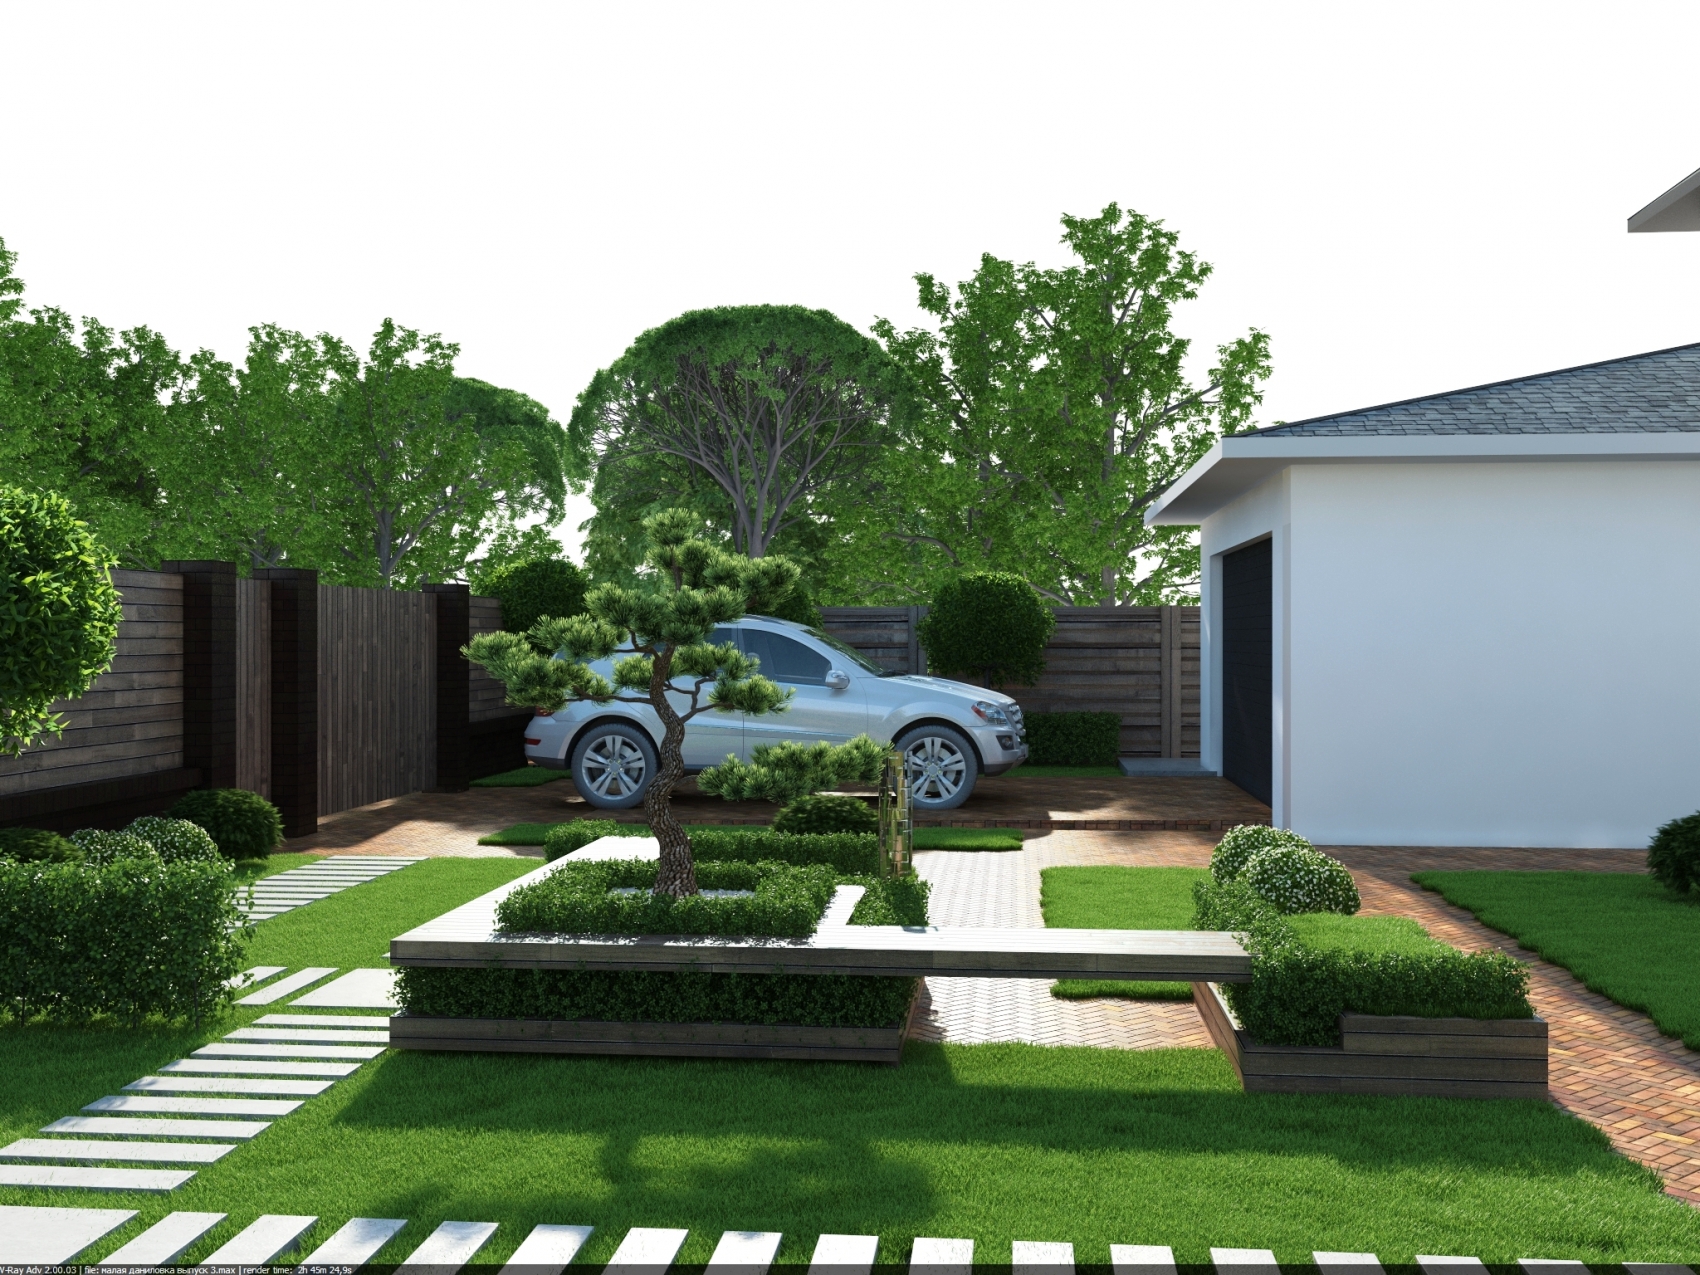 Landscape Design 5 Acres 52 Photos The Rules Of Registration Of The Site With The House